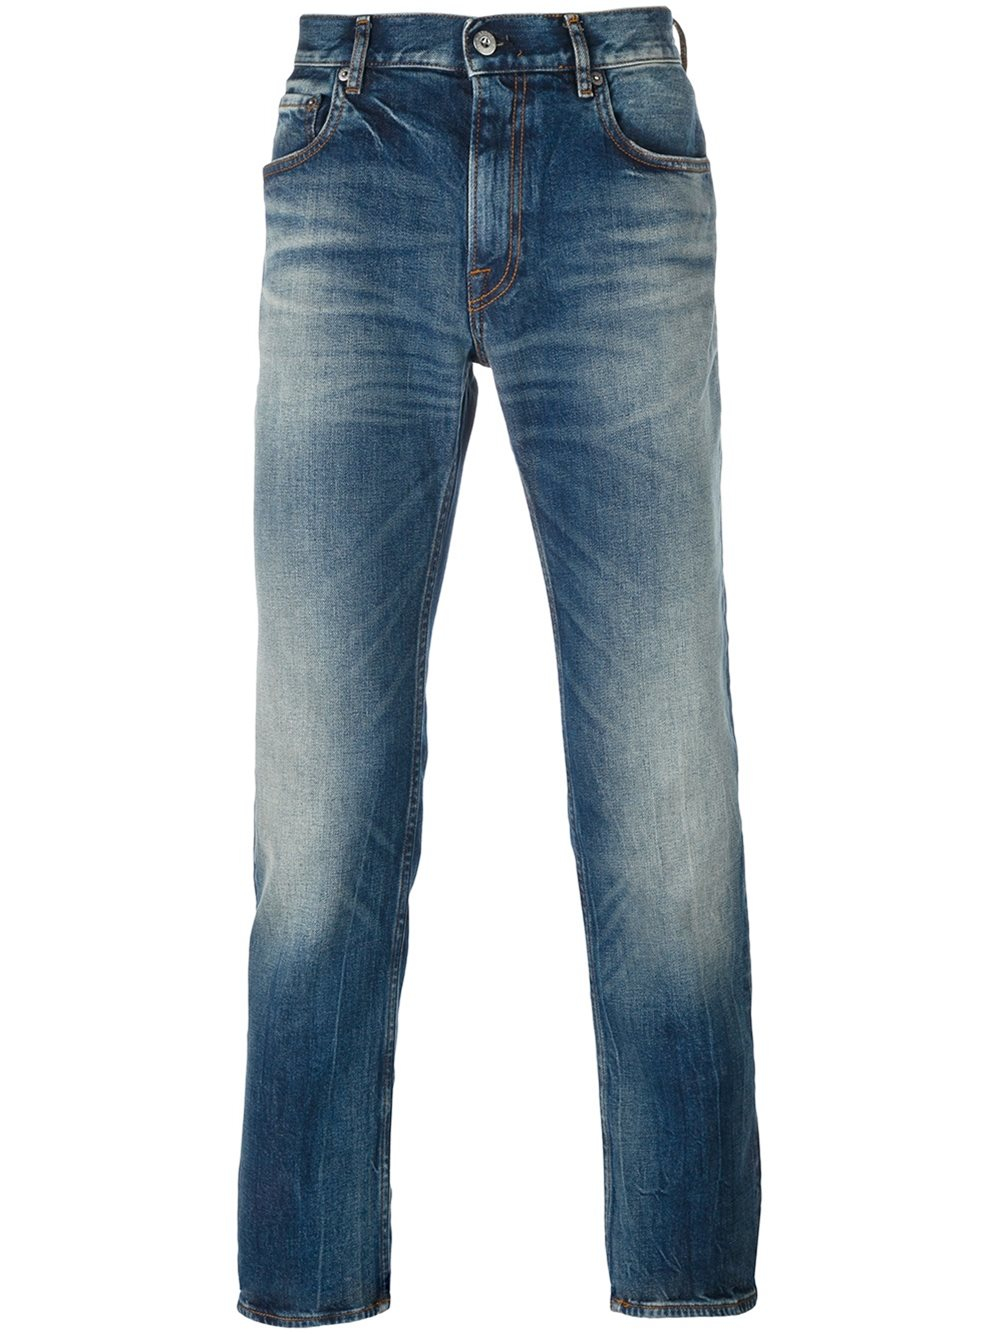 Lyst - Stone Island Stretch Skinny Jeans in Blue for Men